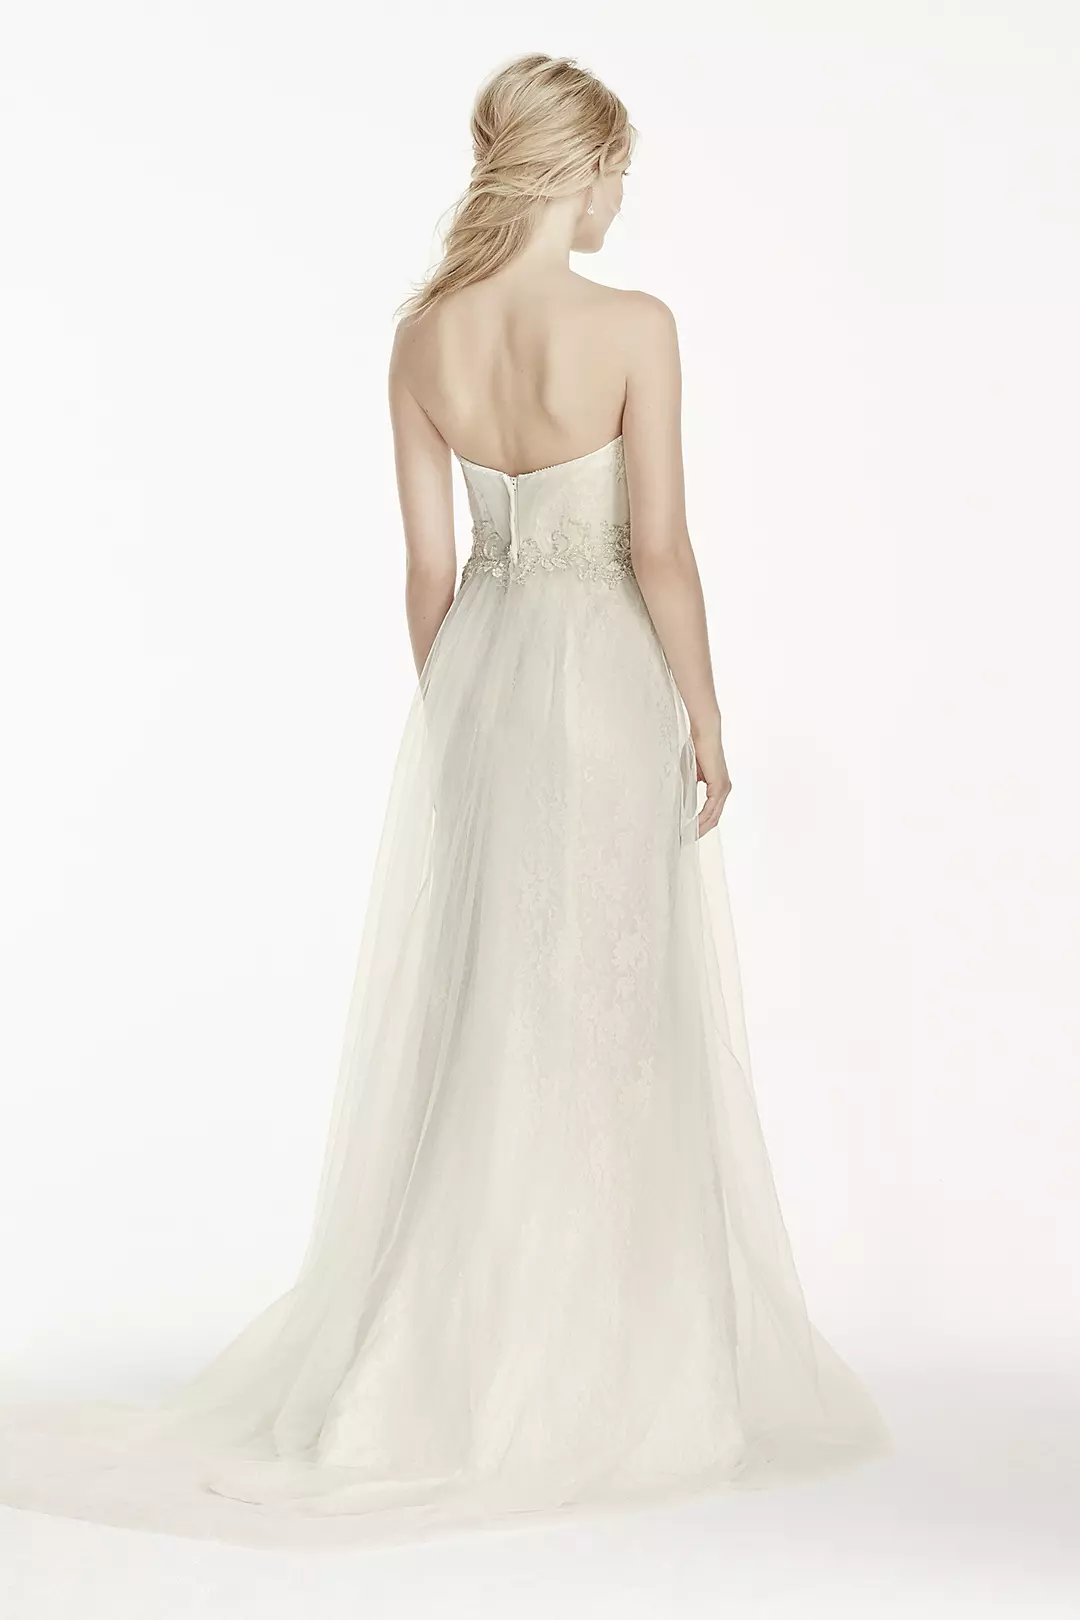 Strapless Tulle Over Lace Sheath Wedding Dress Image 2